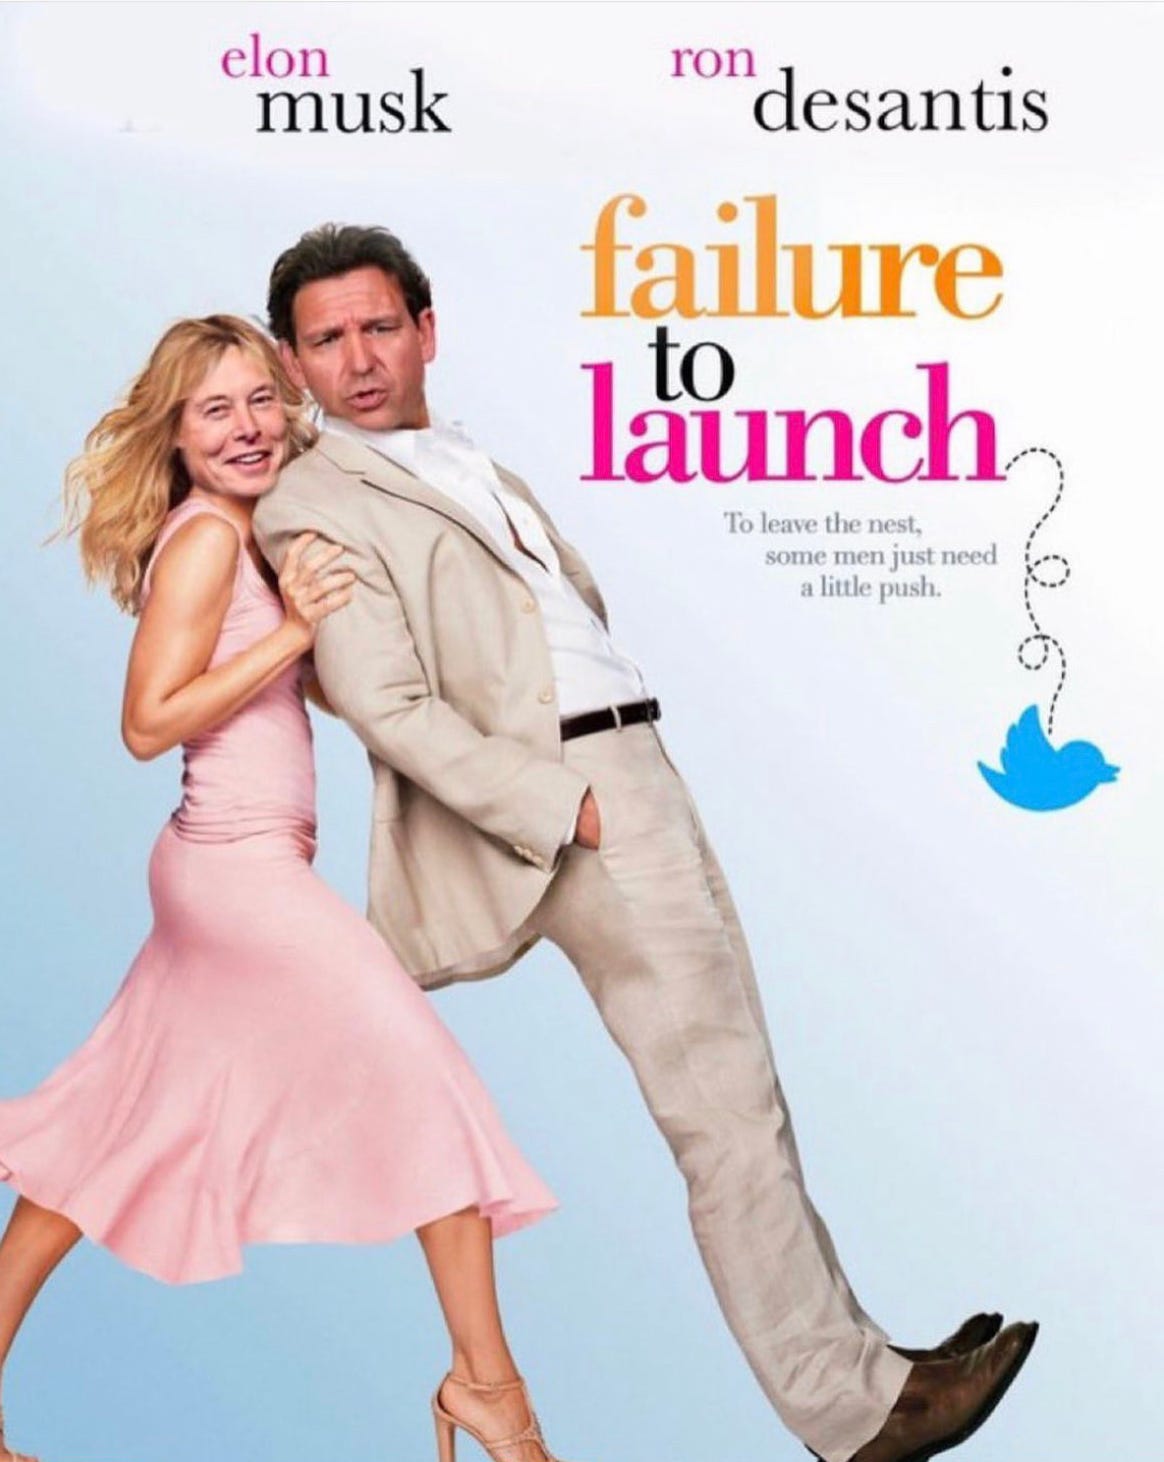 A meme parodying the 2006 film Failure to Launch shared on Twitter shows Elon Musk in Sarah Jessica Parker’s role and Ron DeSantis in Matthew McConaughey’s.